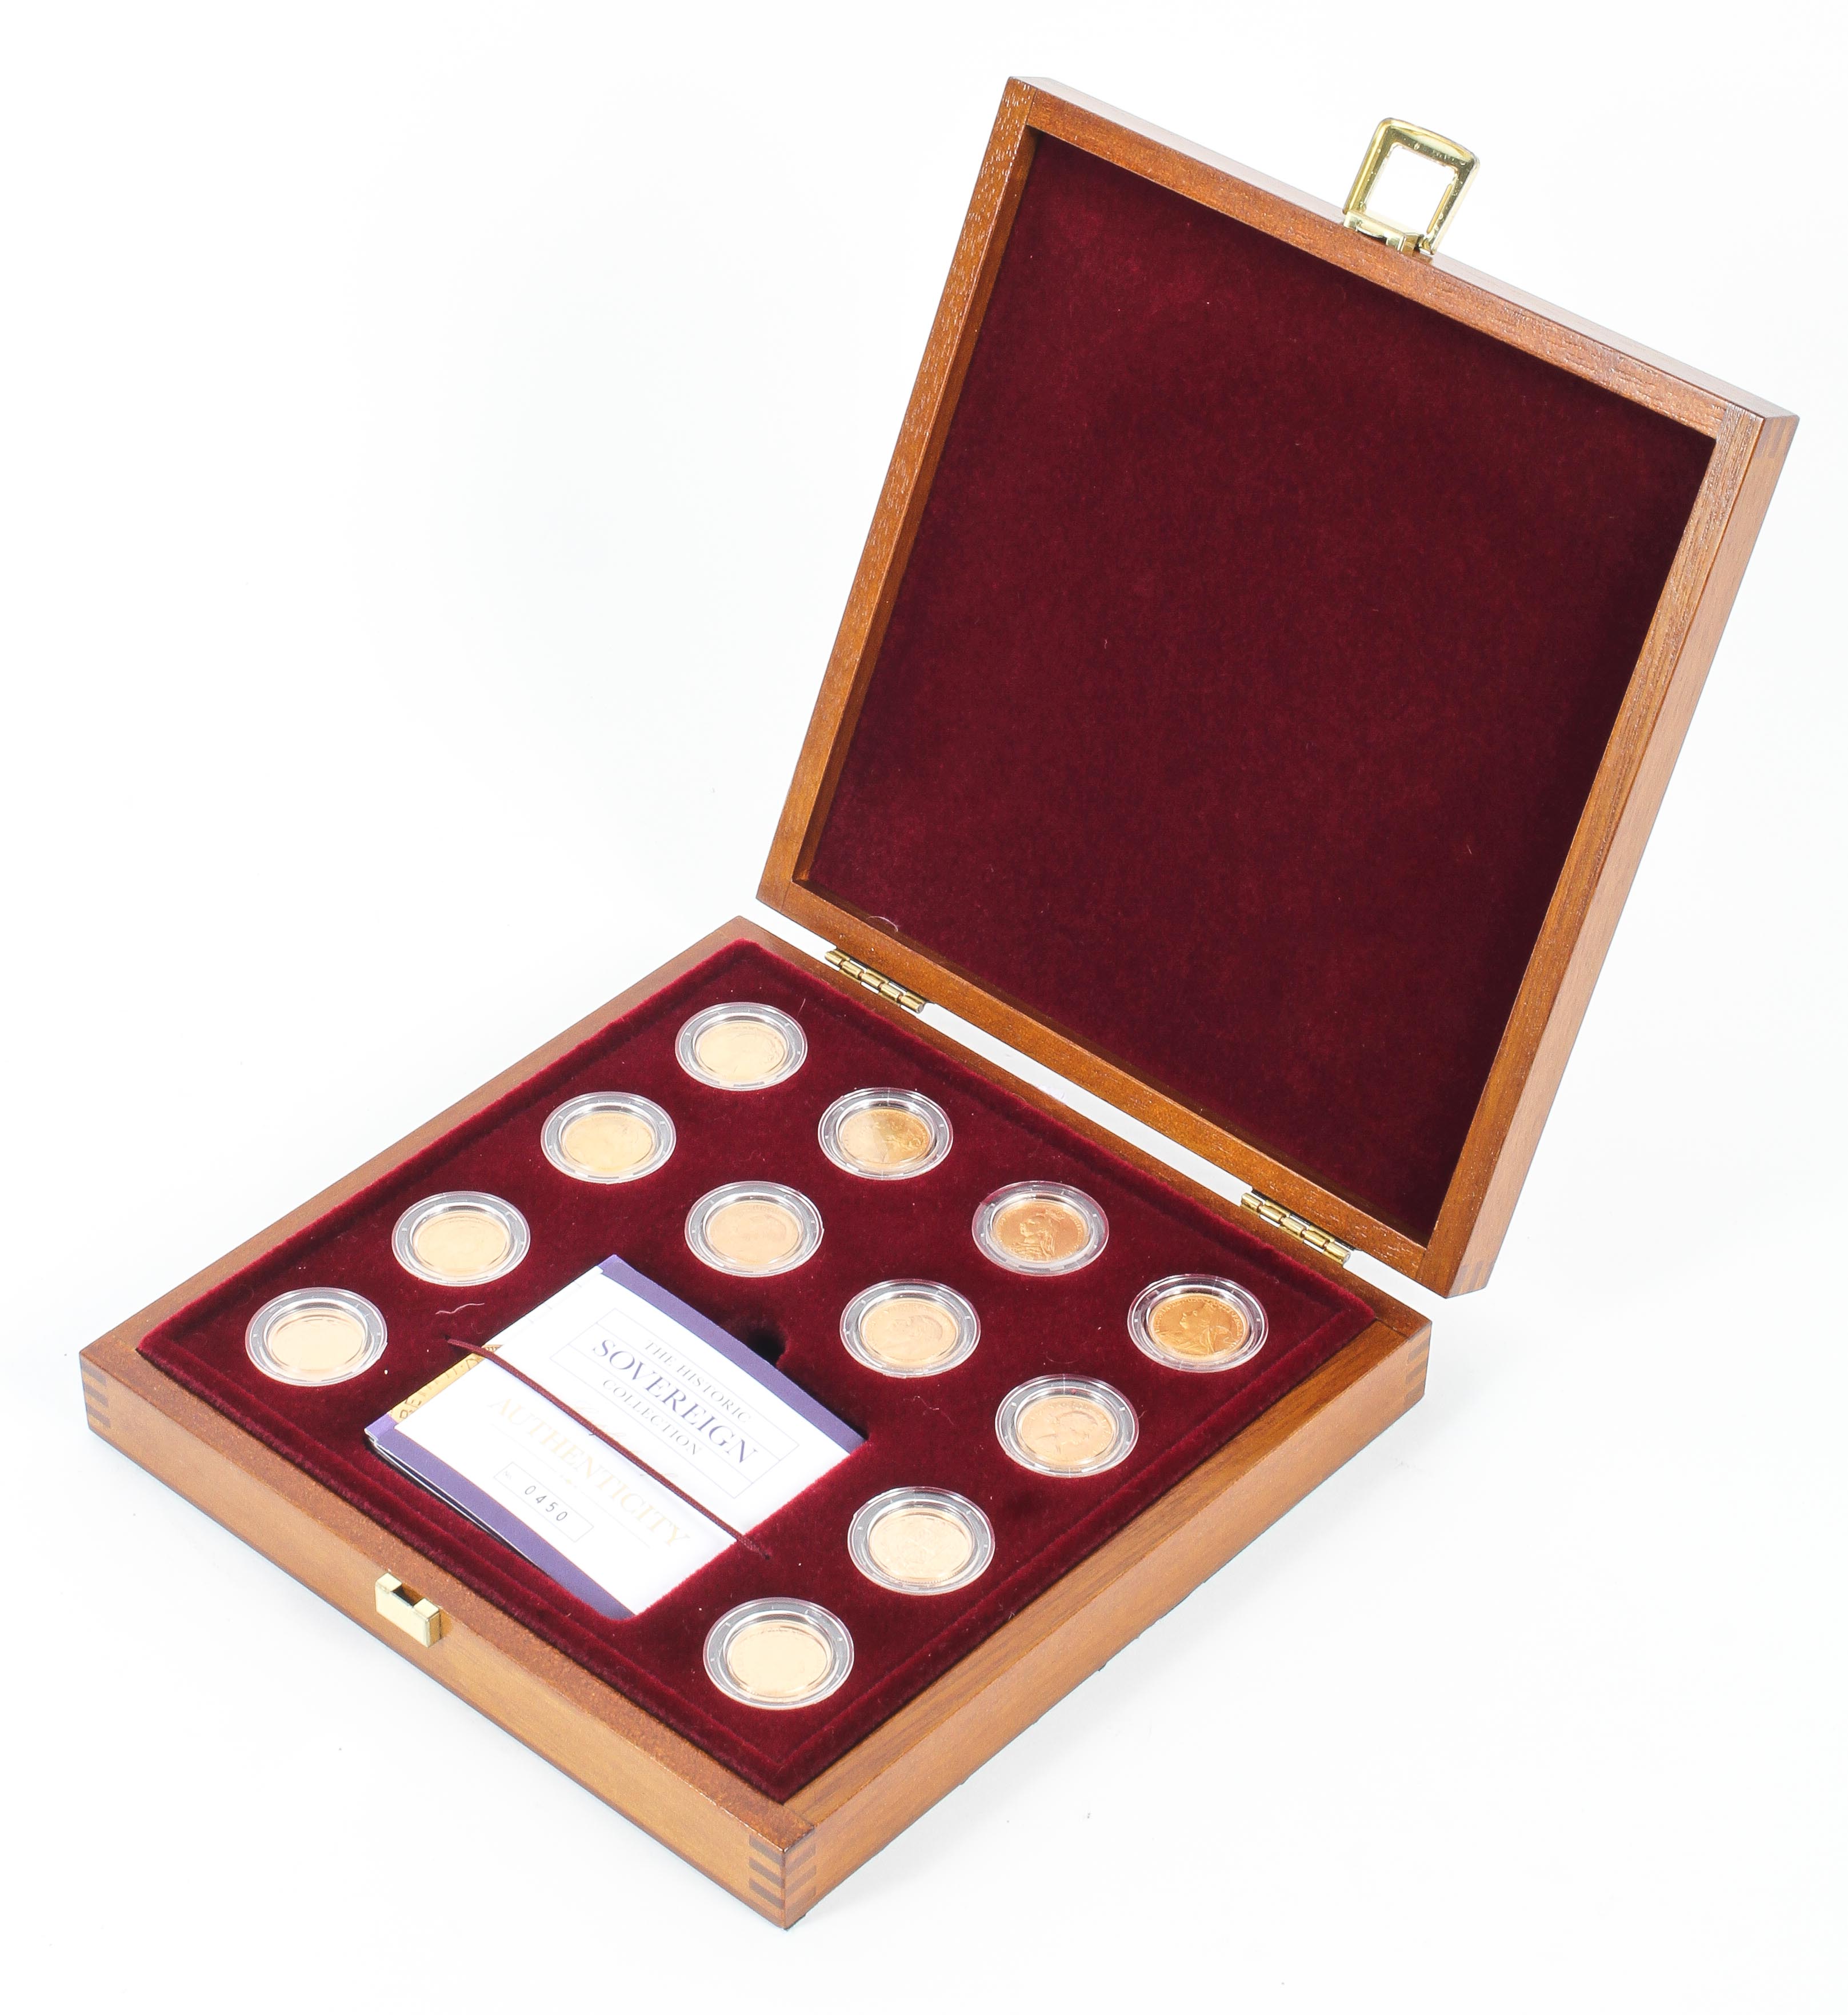 A twelve 22ct gold full sovereign collection "The historic sovereign collection"